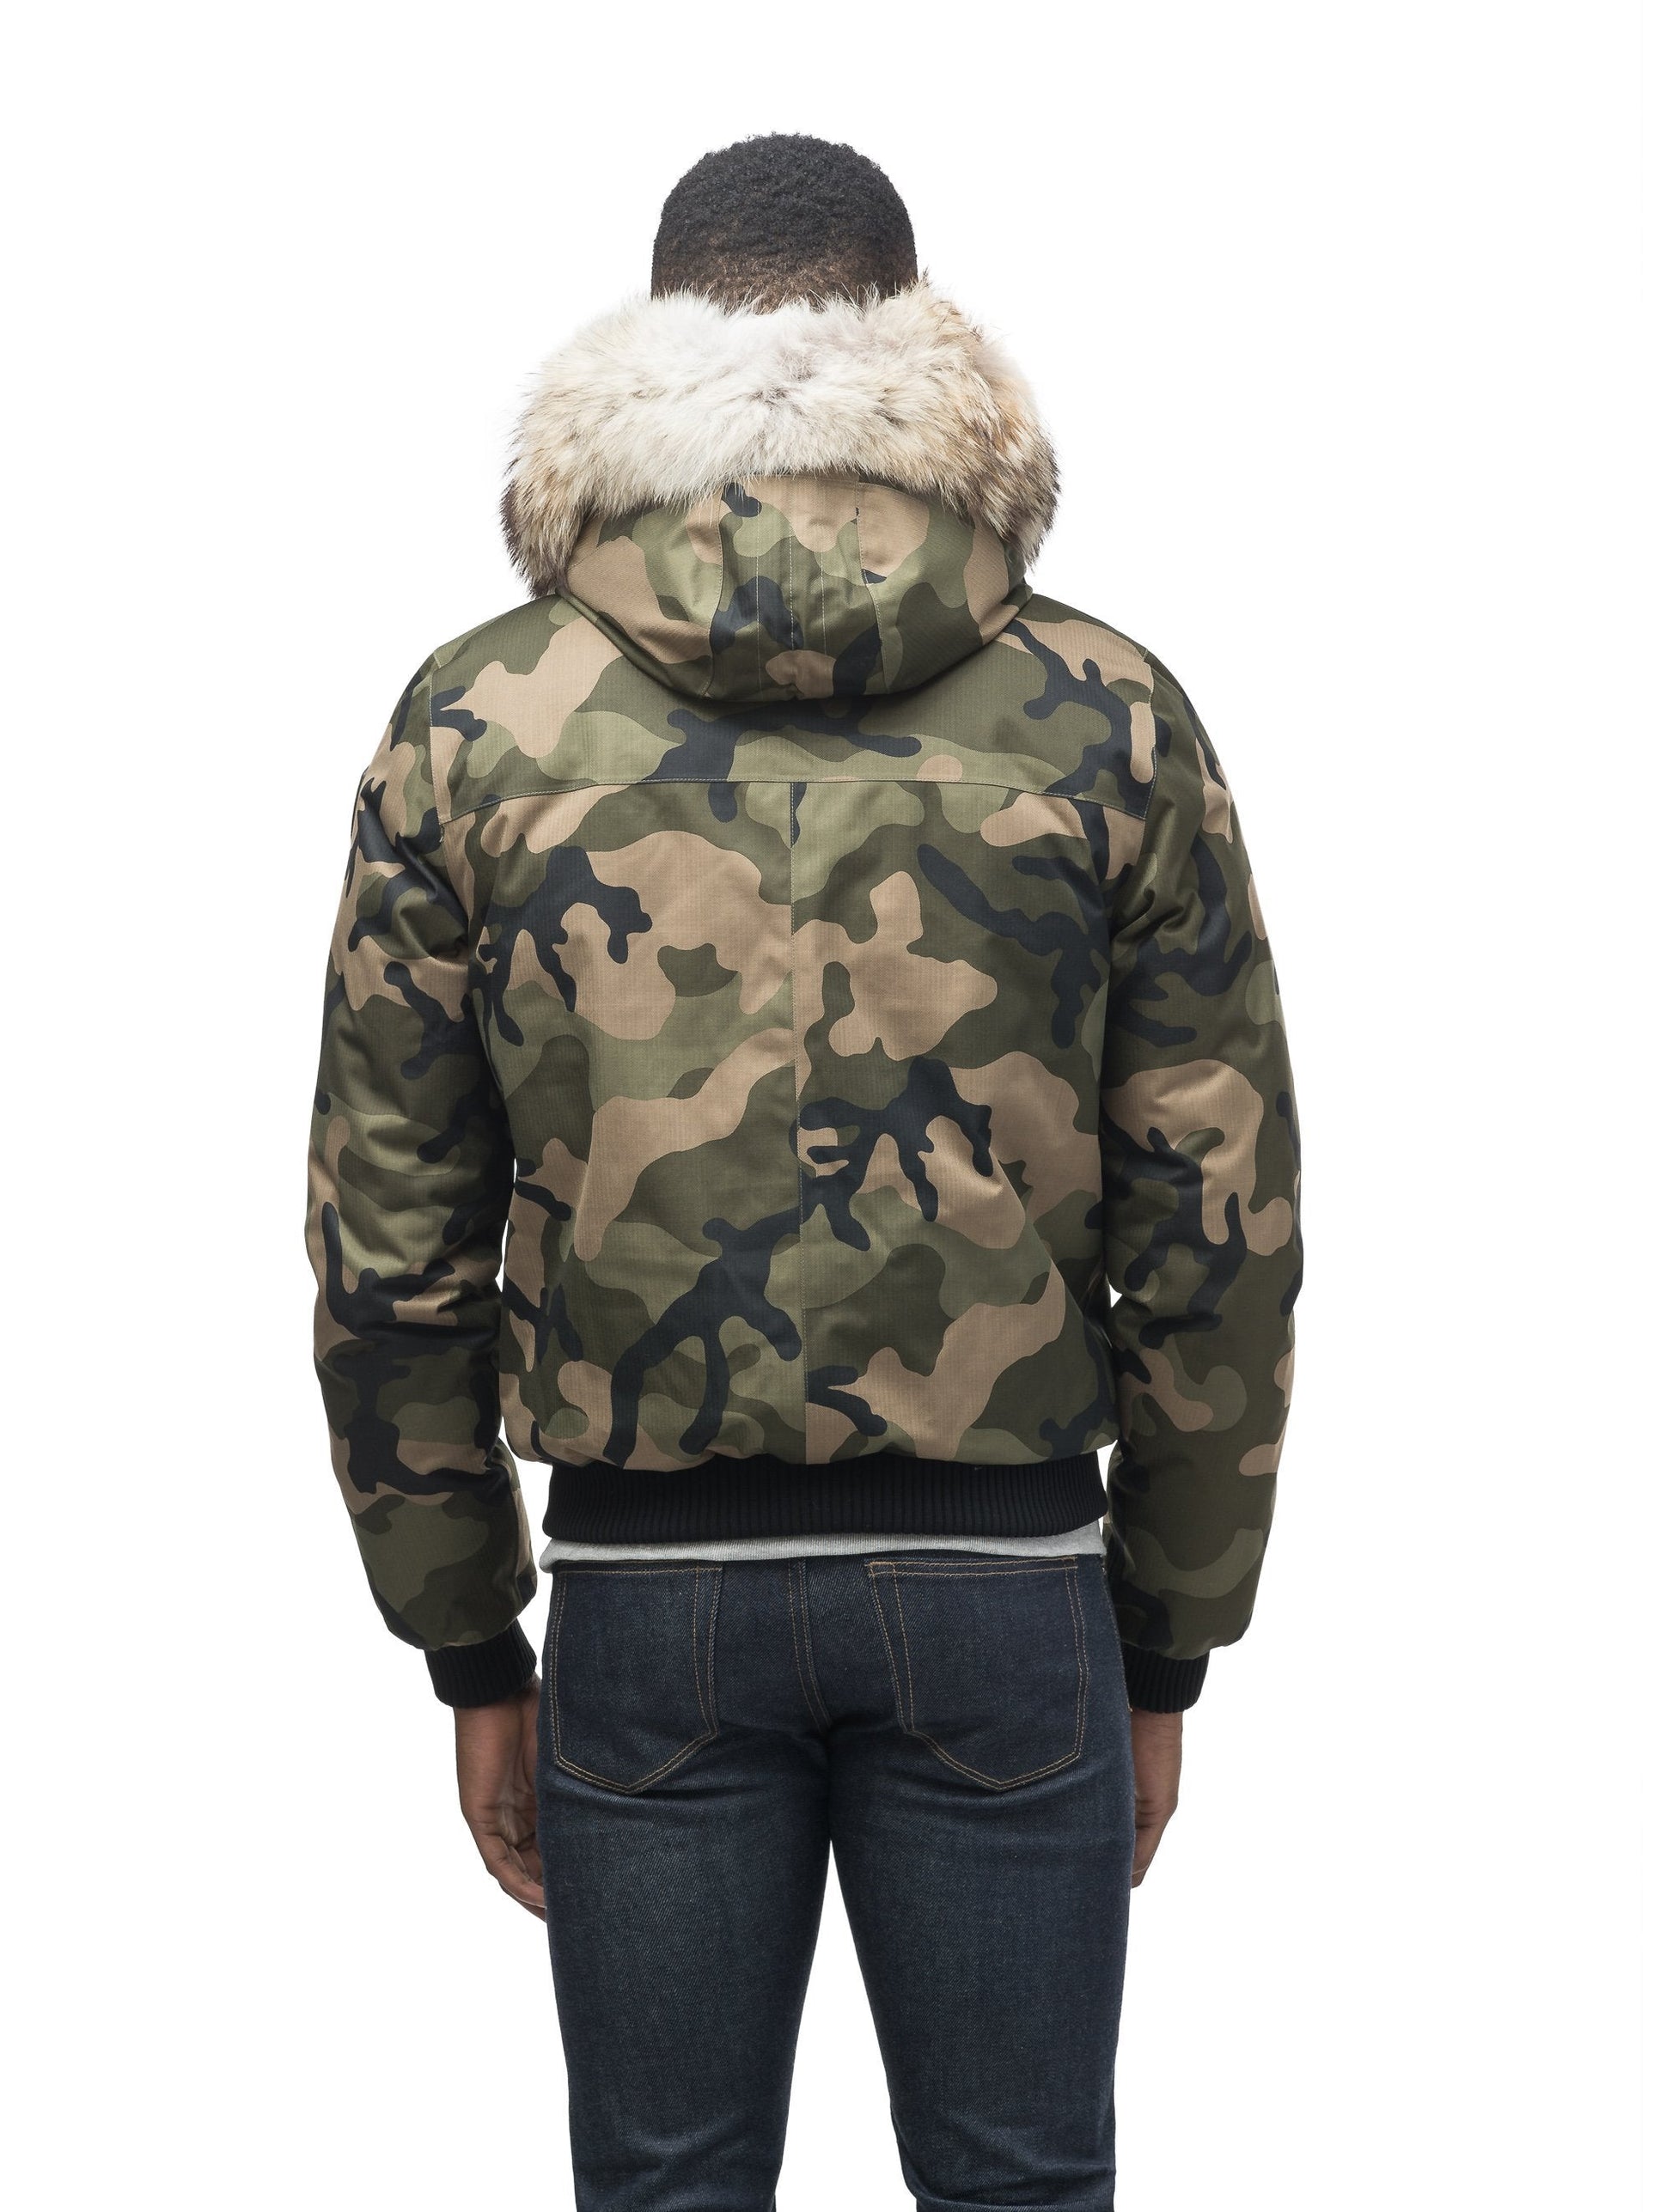 Men's classic down filled bomber jacket with a down filled hood that features a removable coyote fur trim and concealed moldable framing wire in Camo